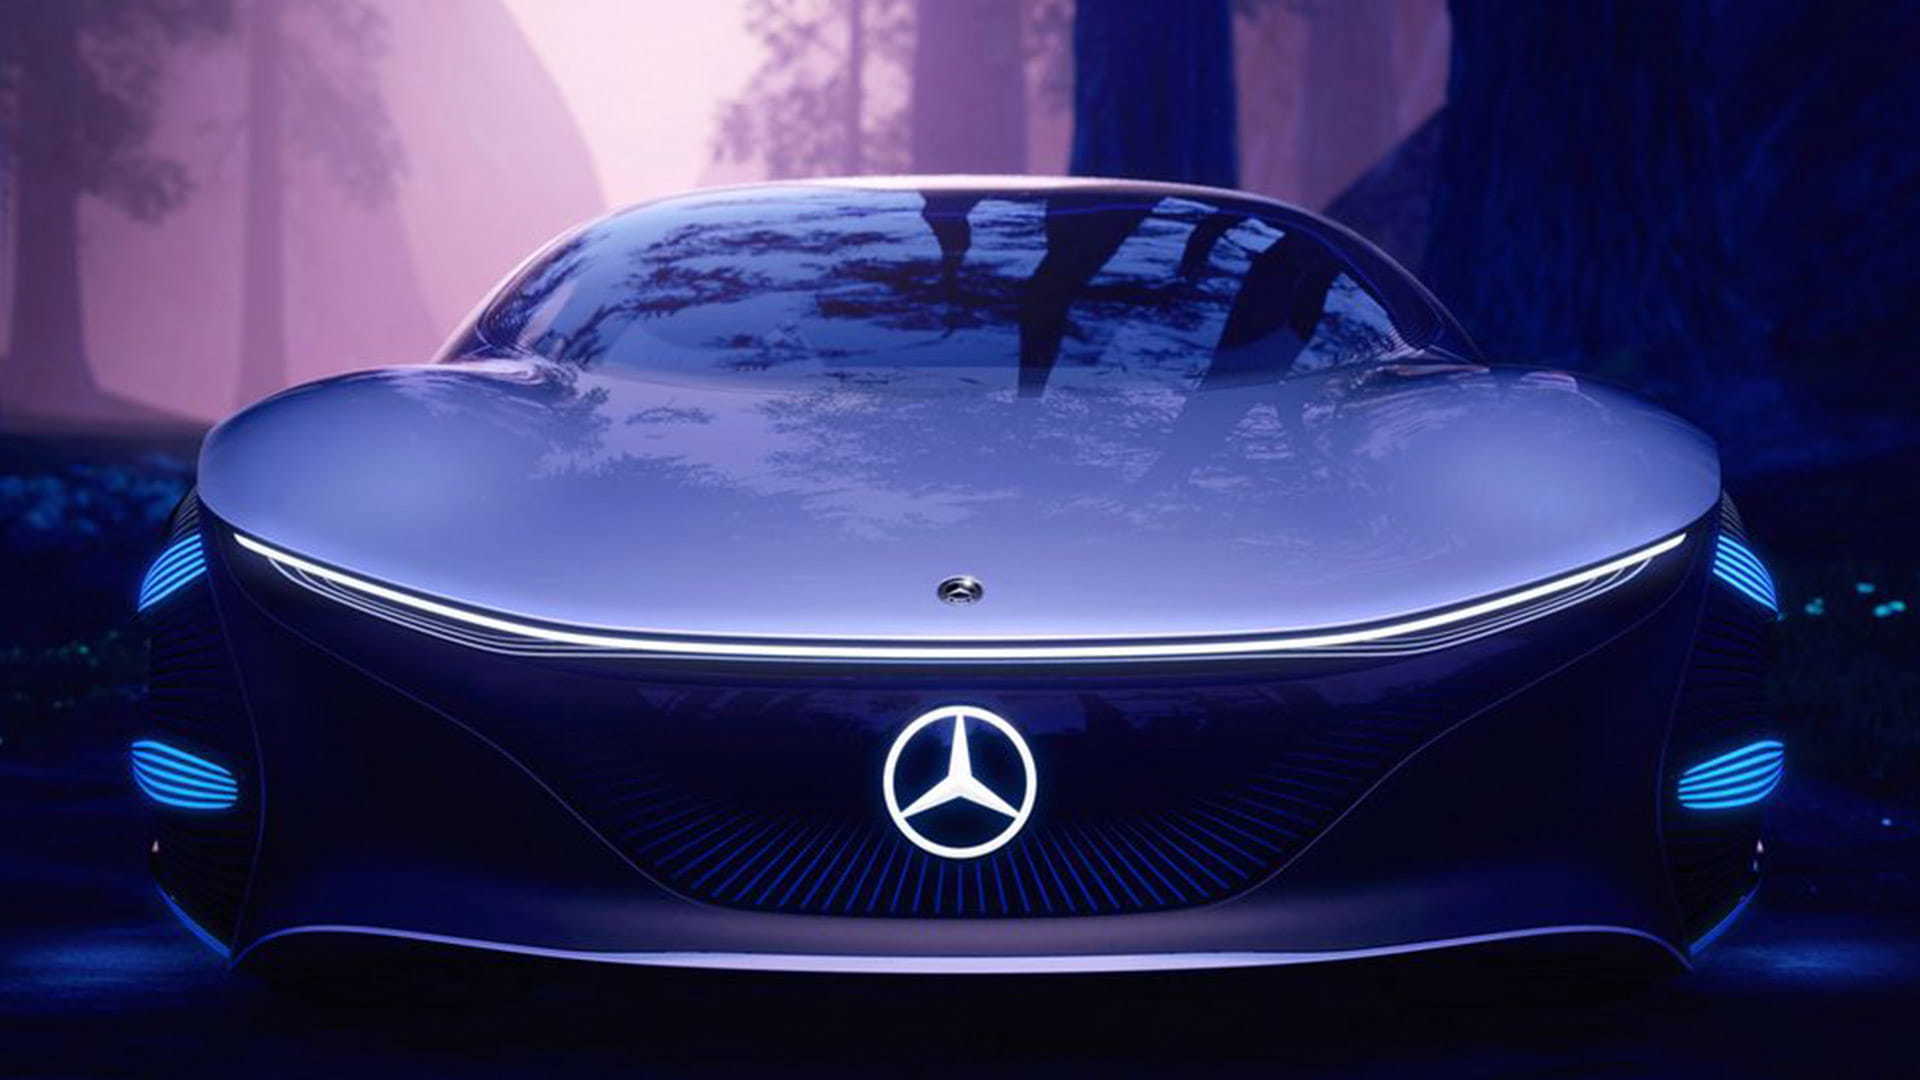 A close-up of the front of the VISION AVTR concept car.